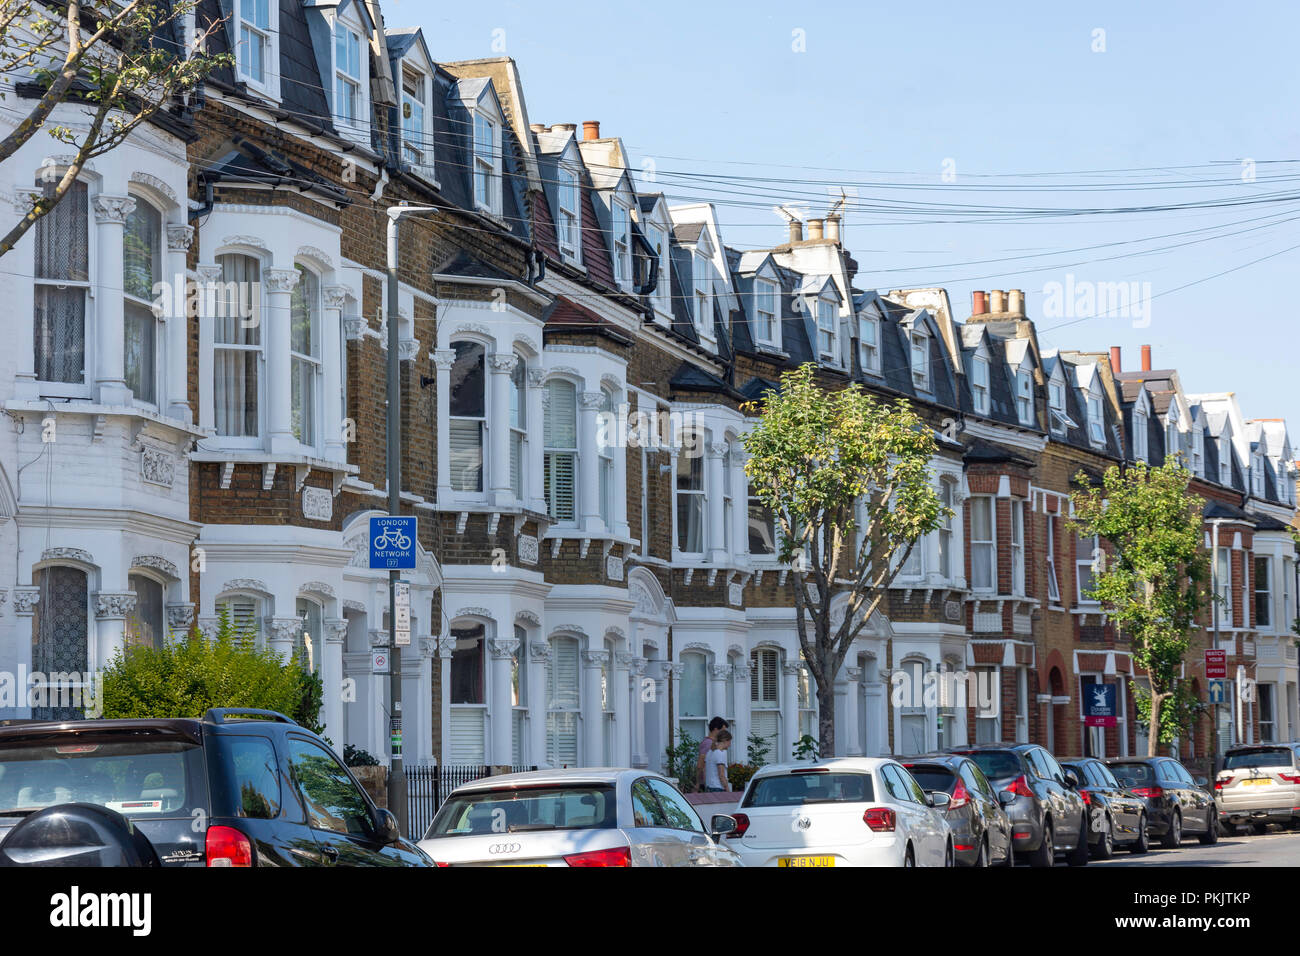 Victorian terraced houses, Norroy Road, Putney, London Borough of Wandsworth, Greater London, England, United Kingdom Stock Photo